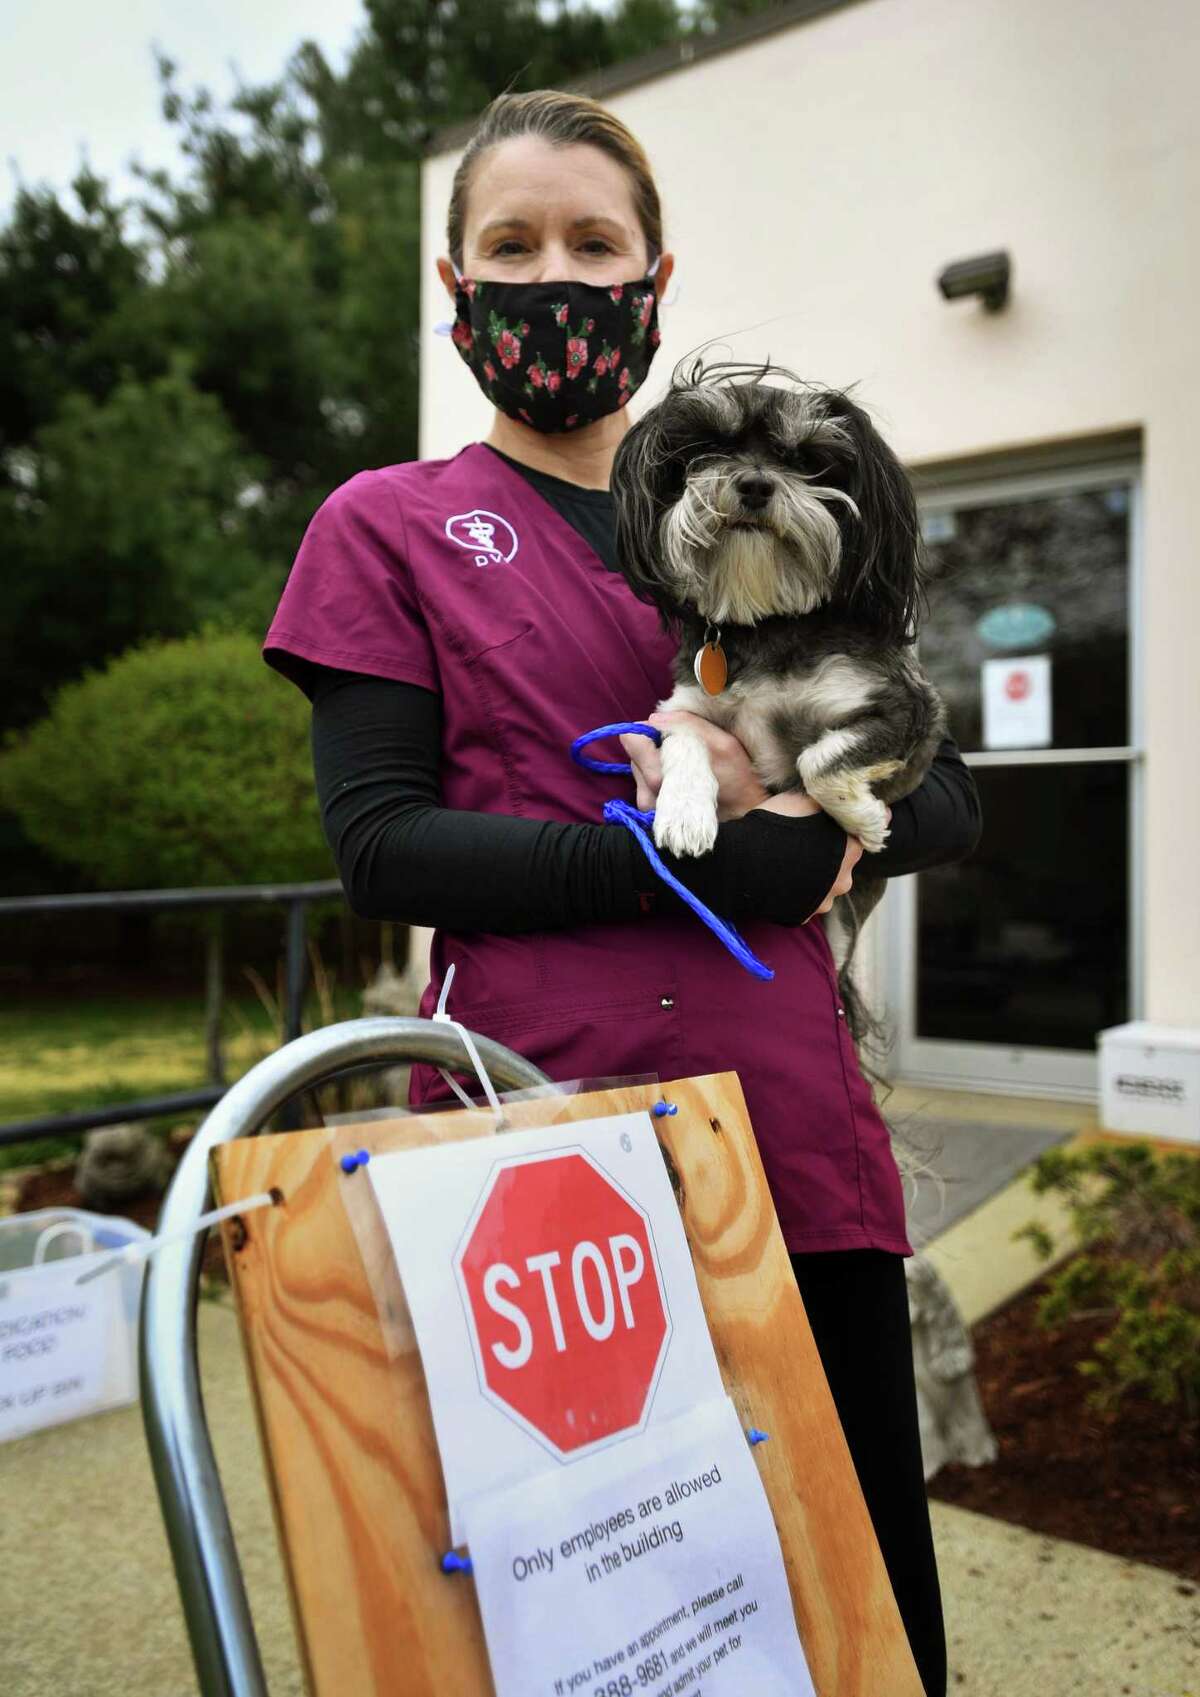 Veterinarian Suzanne Magruder, DVM, owner of Saybrook Veterinary Hospital, with her dog Dexter in Old Saybrook, Conn. on Wednesday, May 6, 2020.